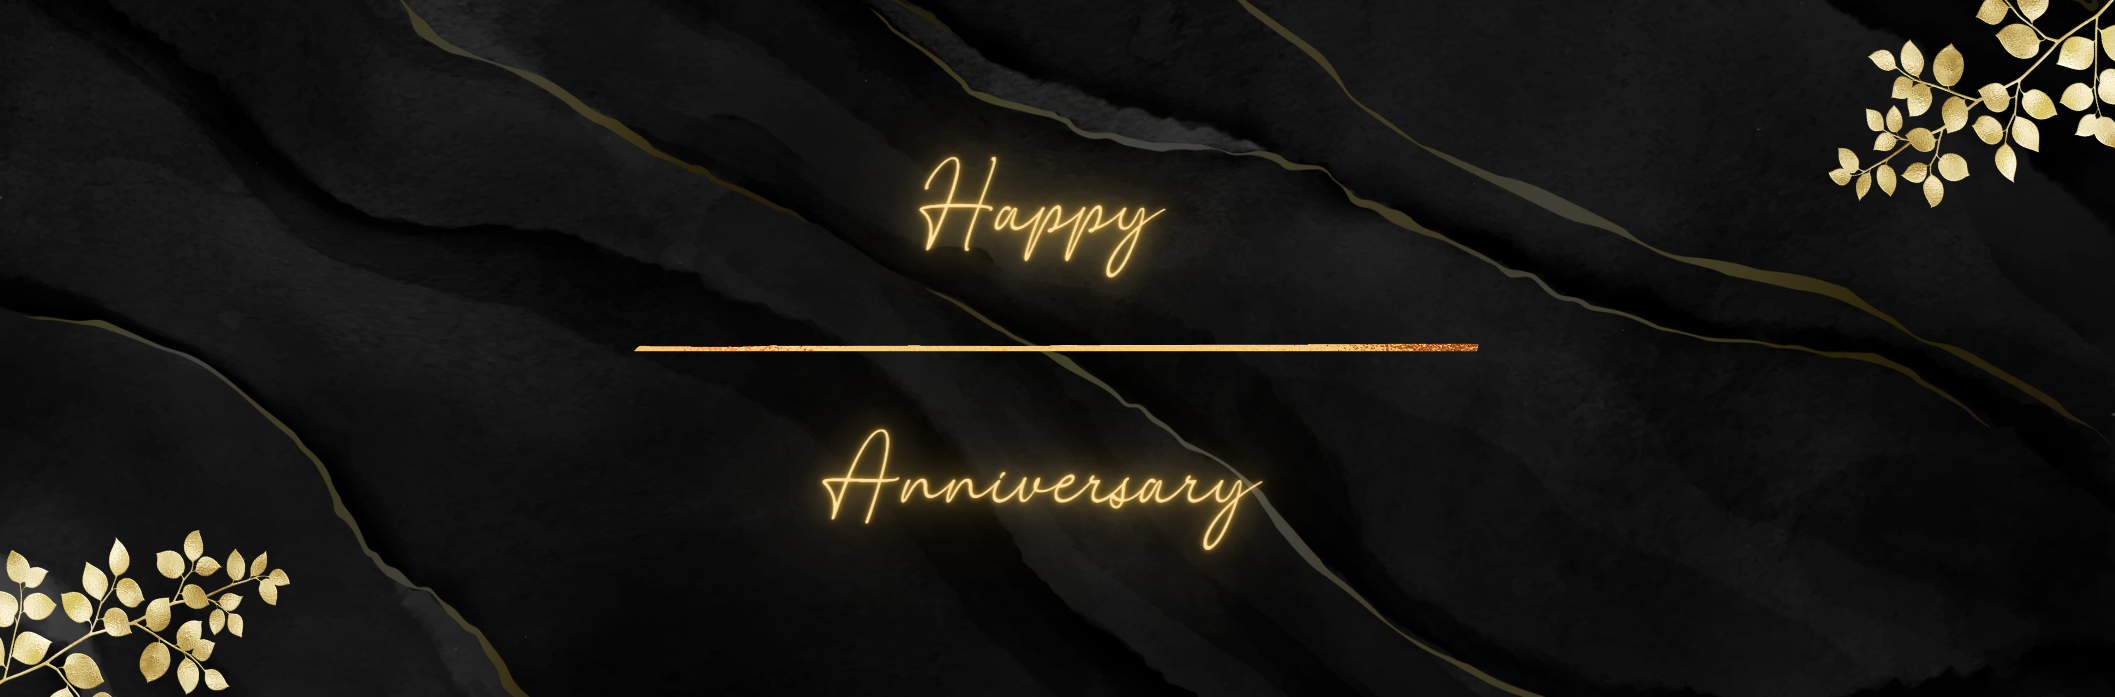 Happy Anniversary banner with gold and white lettering on a black background, perfect for celebrating special occasions and milestones